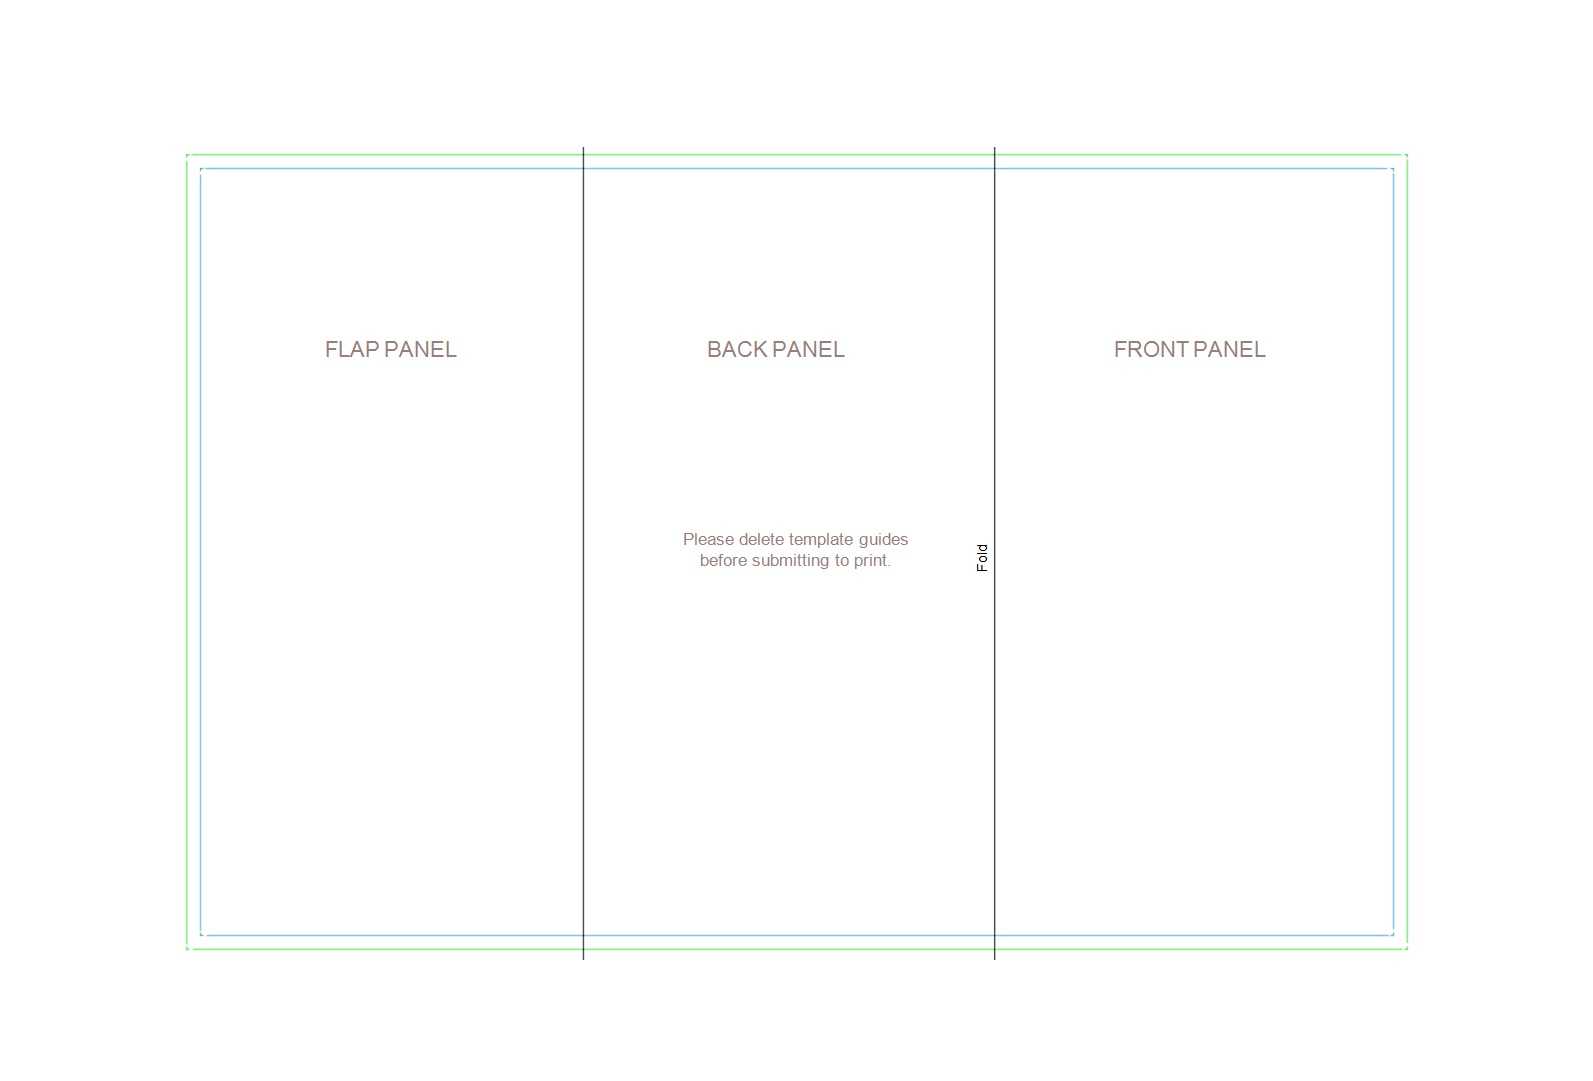 50 Free Pamphlet Templates [Word / Google Docs] ᐅ Template Lab With Tri Fold Brochure Template Google Docs